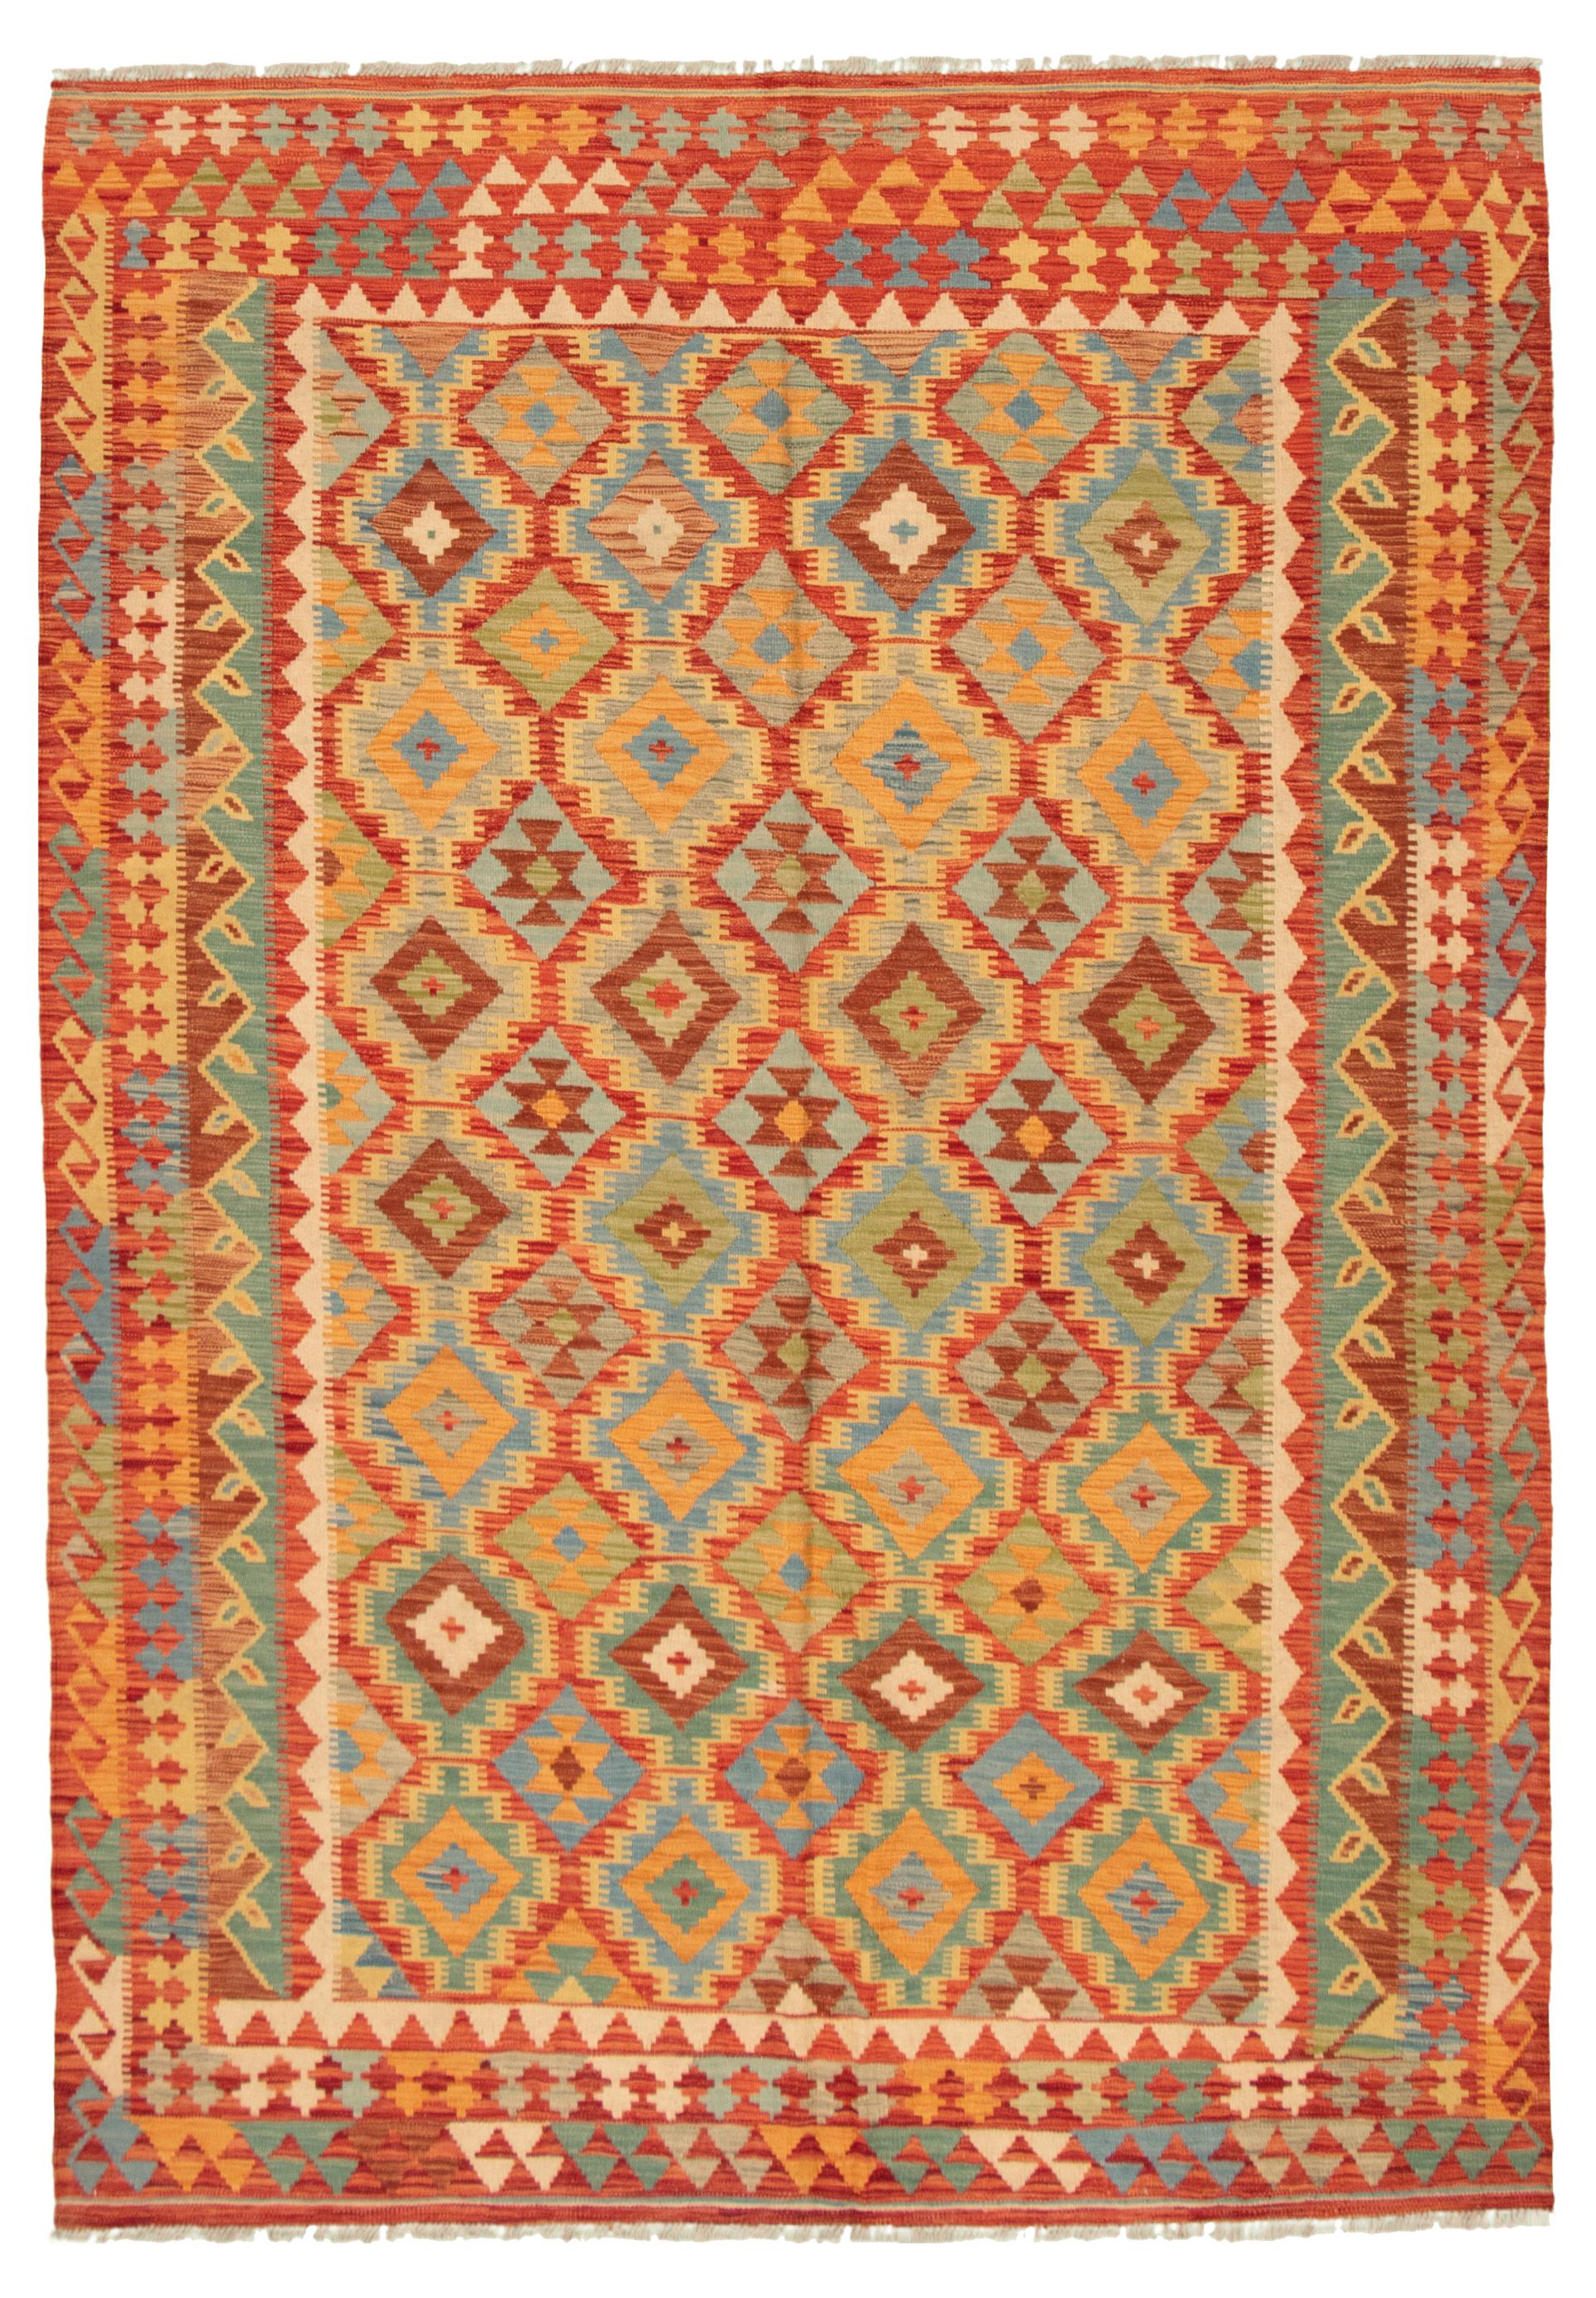 Hand woven Bold and Colorful  Red Wool Kilim 6'7" x 9'6" Size: 6'7" x 9'6"  